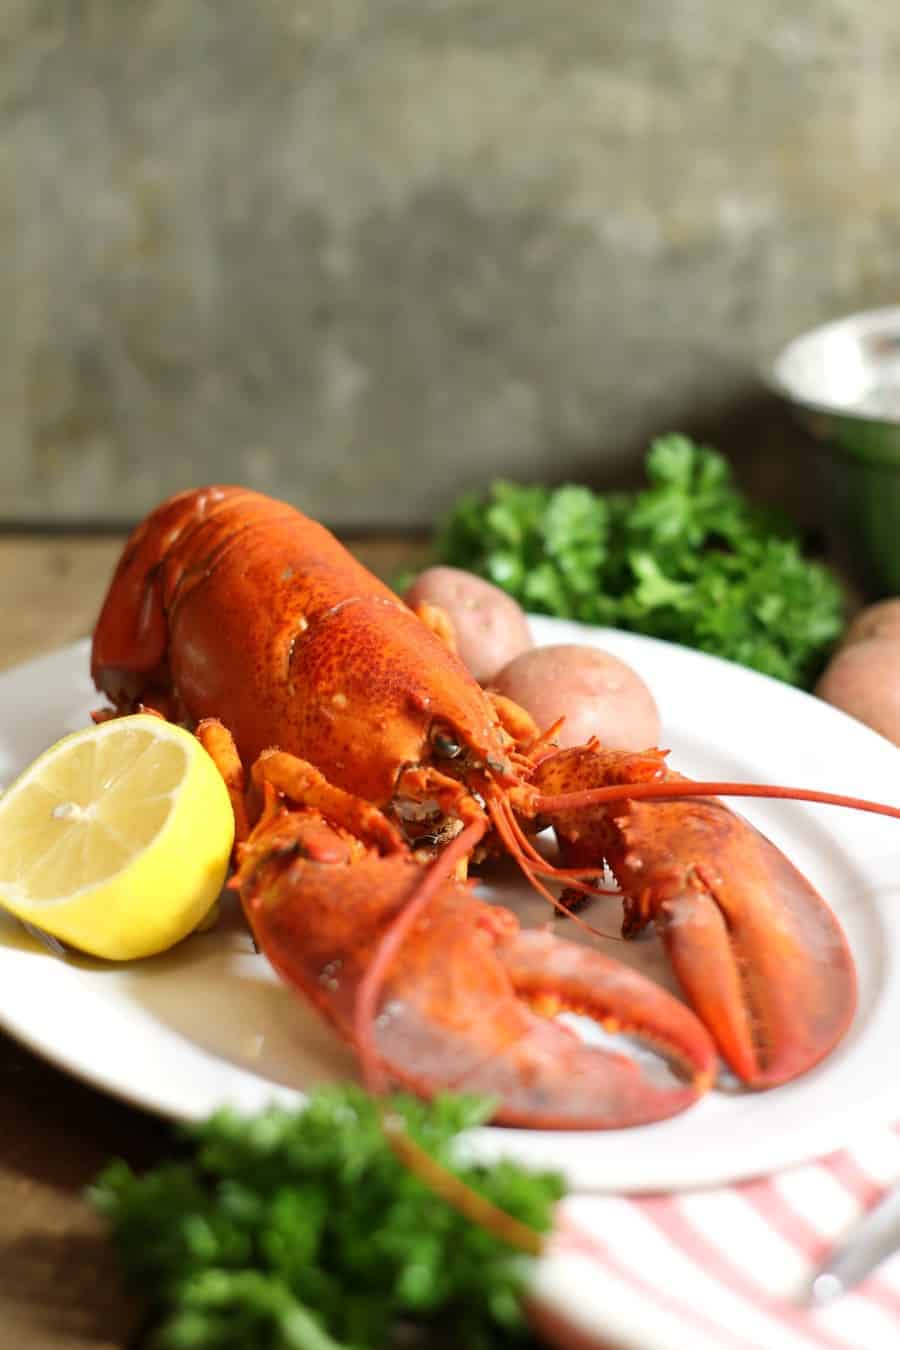 An Atlantic lobster freshly boiled and displayed on a white platter with lemon and parsley